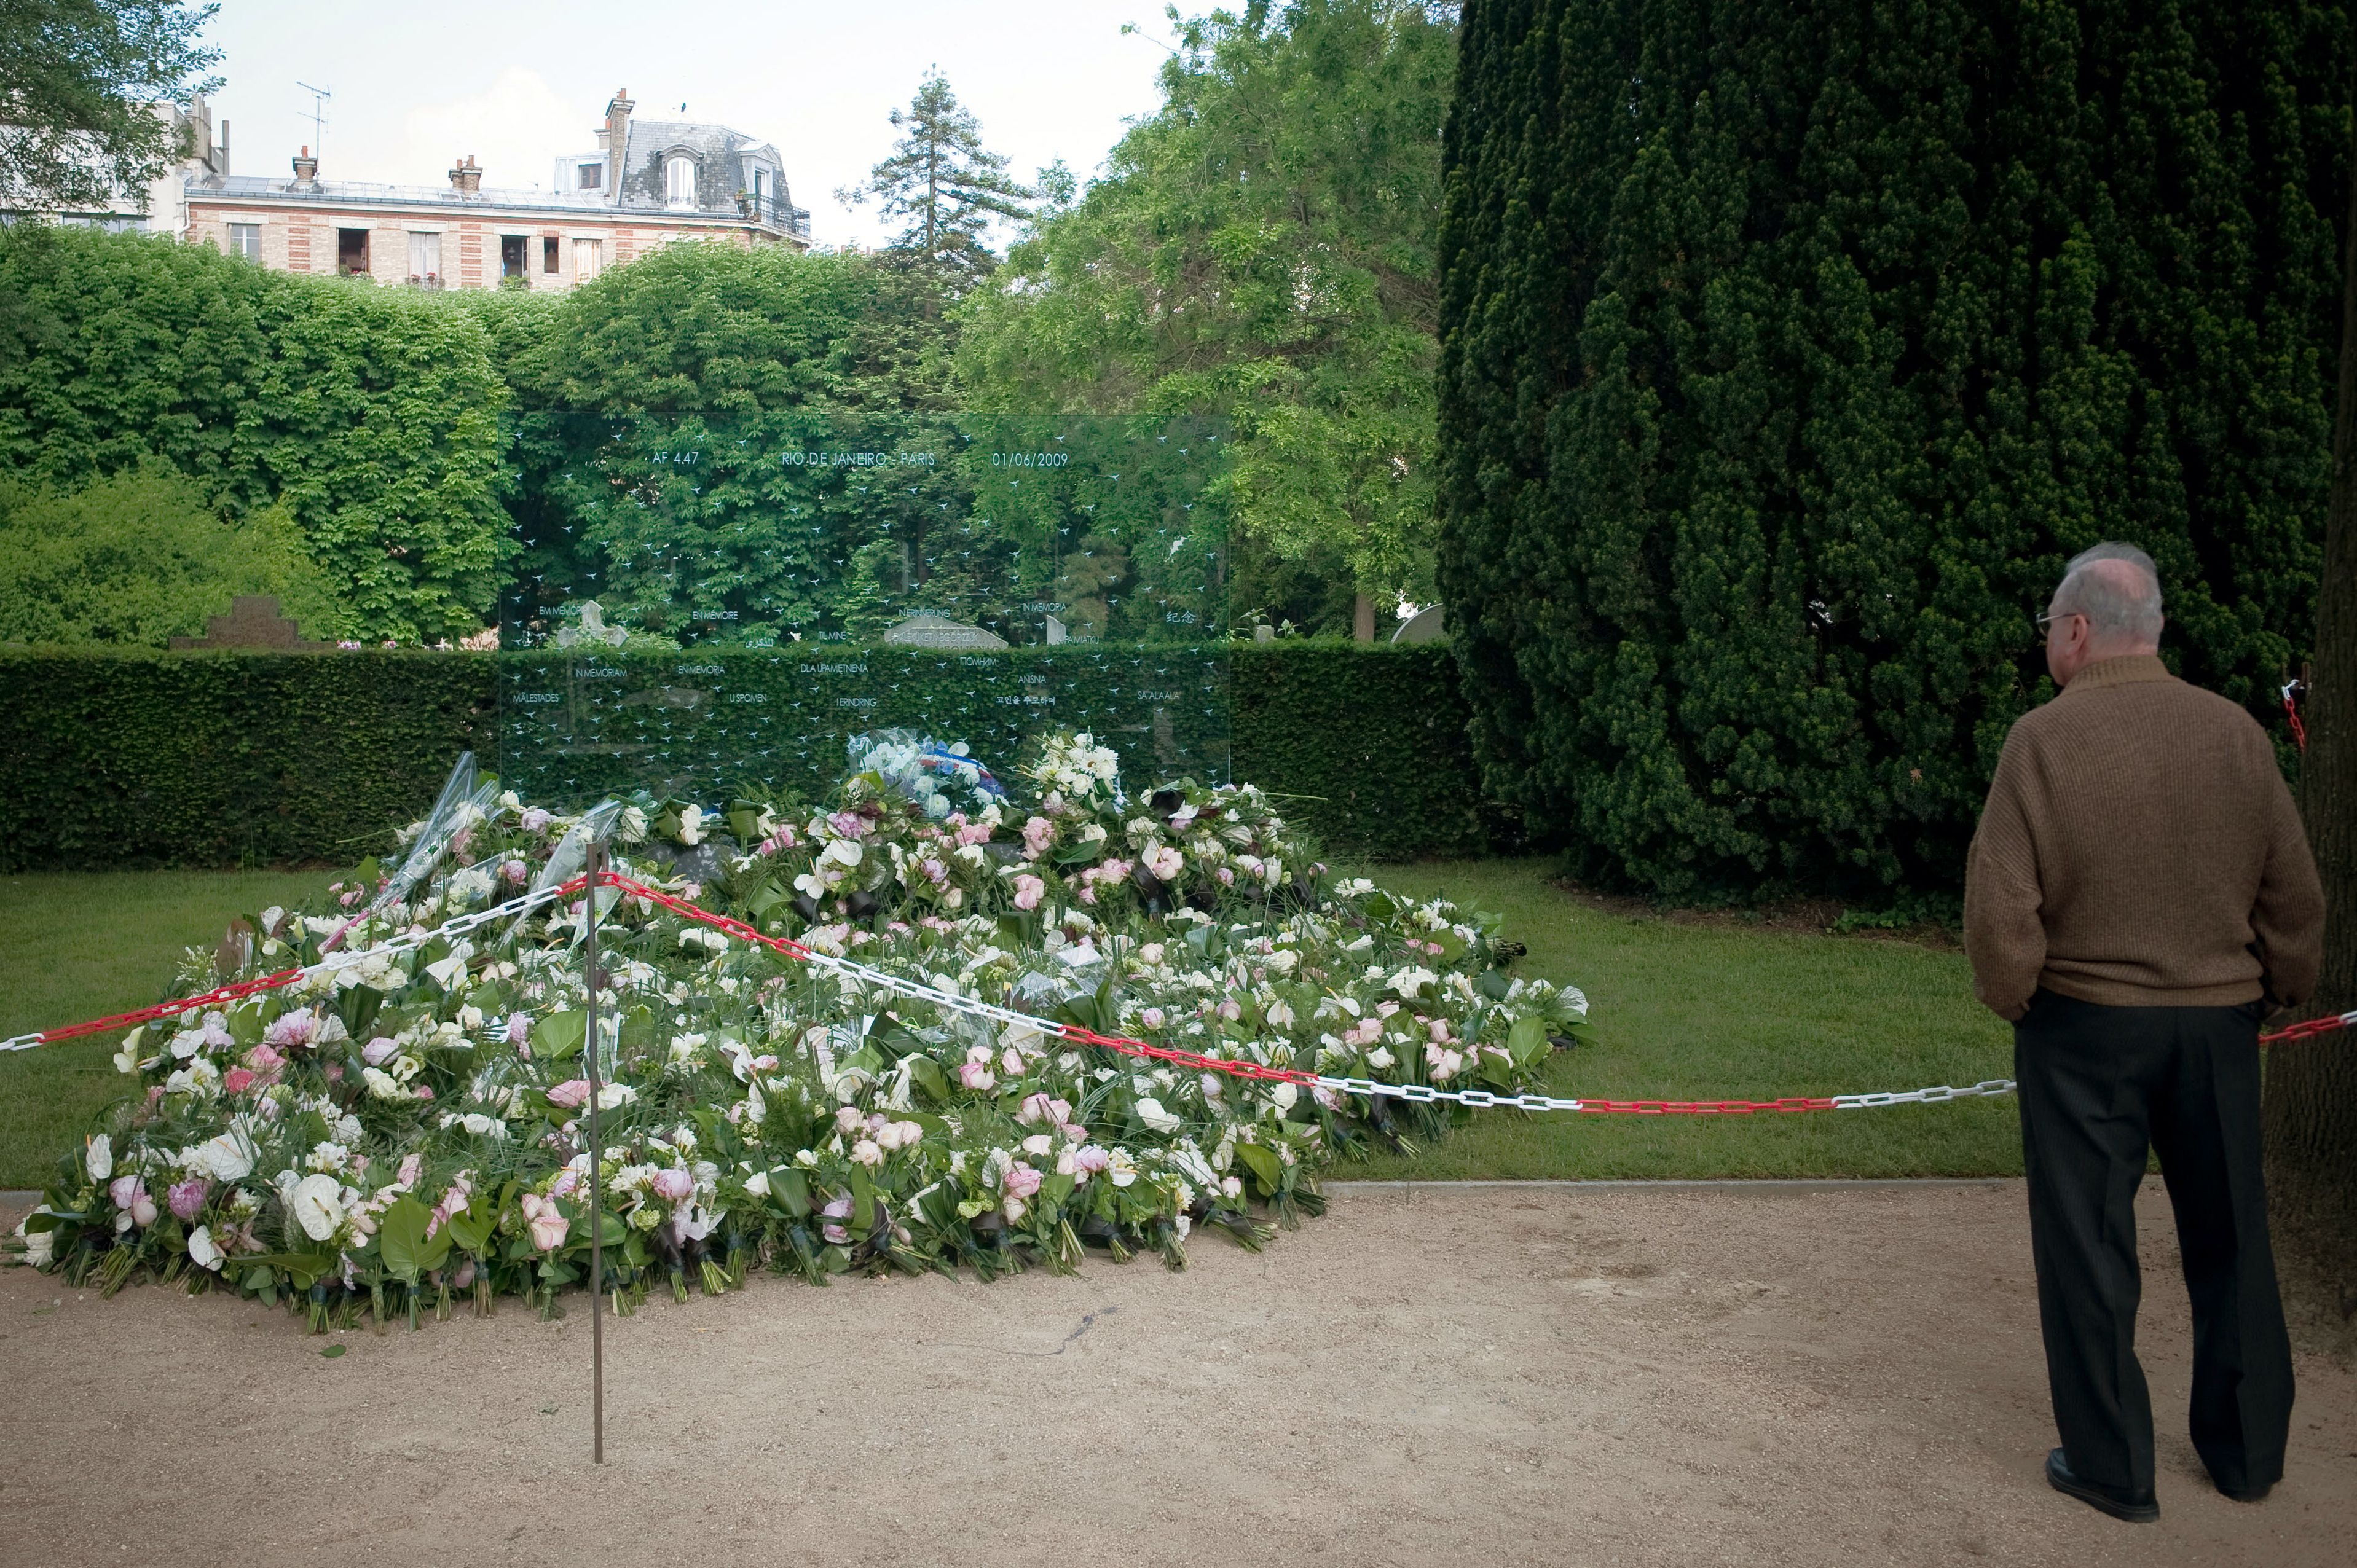 Flowers for the victims of the Air France A330 aircraft, flight AF447 that crashed in 2009 | Source: Getty Images